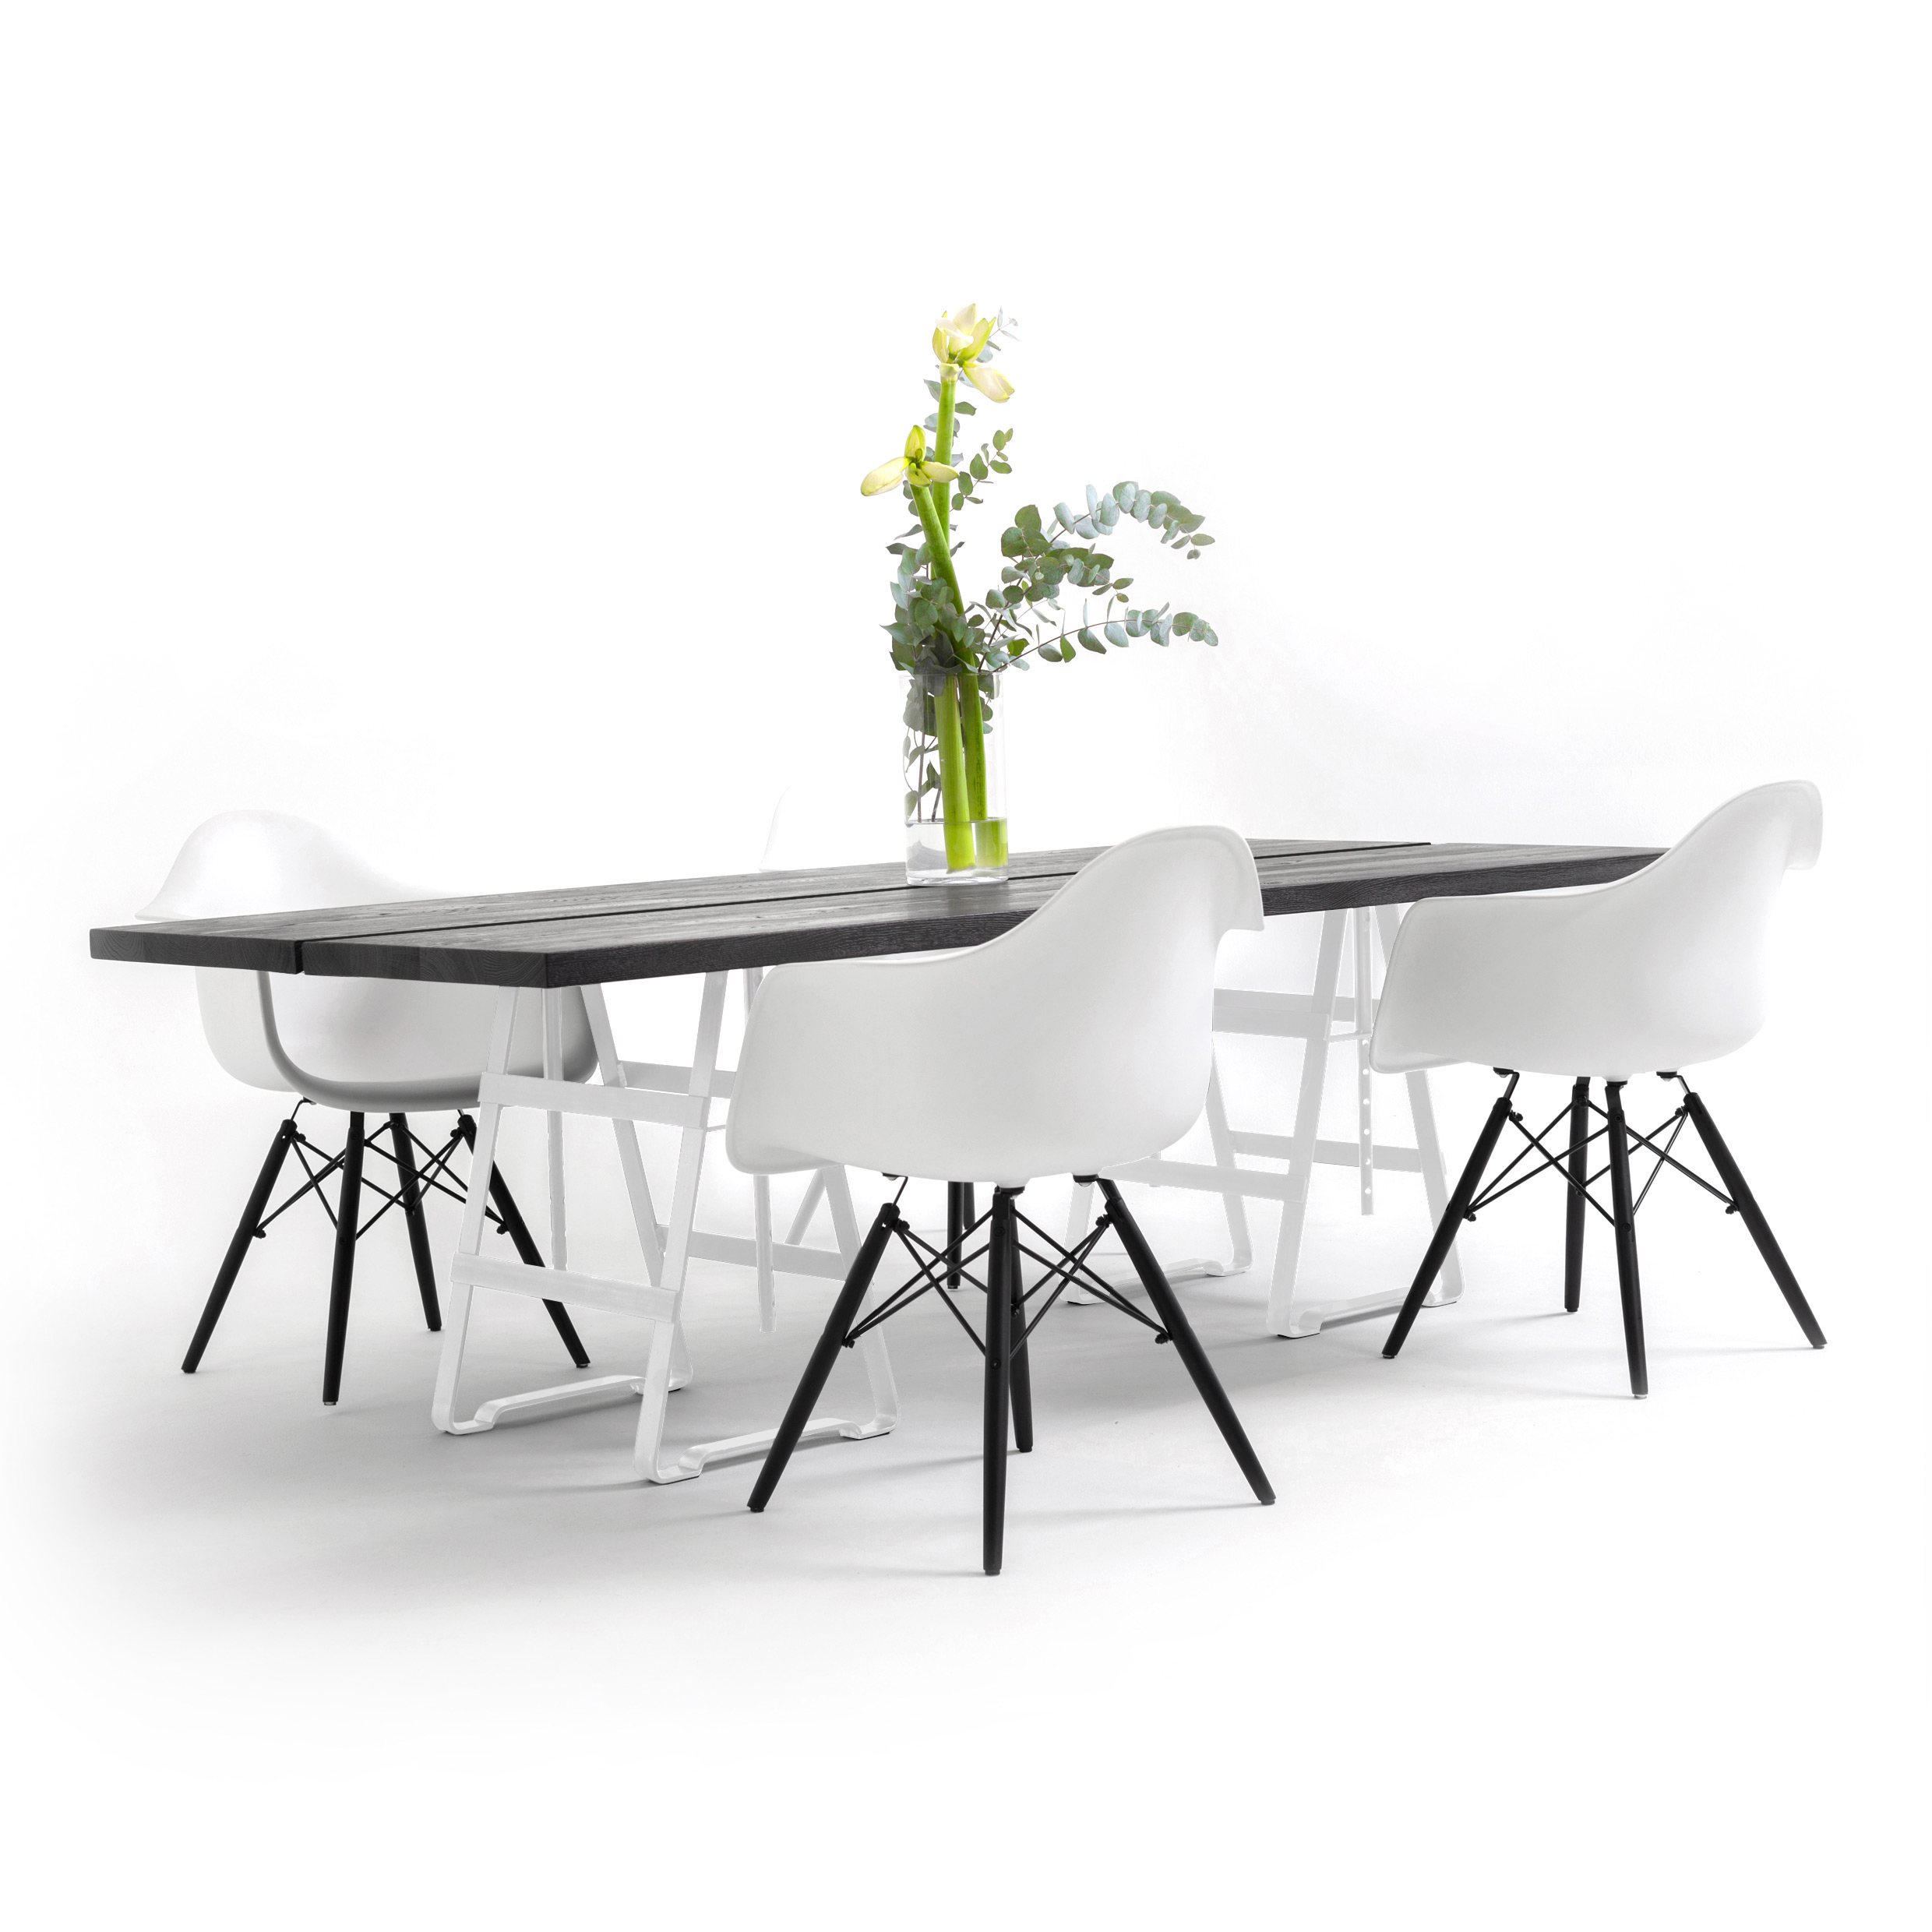 FORM EXCLUSIVE // JOON - IN-/OUTDOOR TABLE | BLACK CARED - 260CM X 45CM X 5CM - PAINT MONKEY WHITE